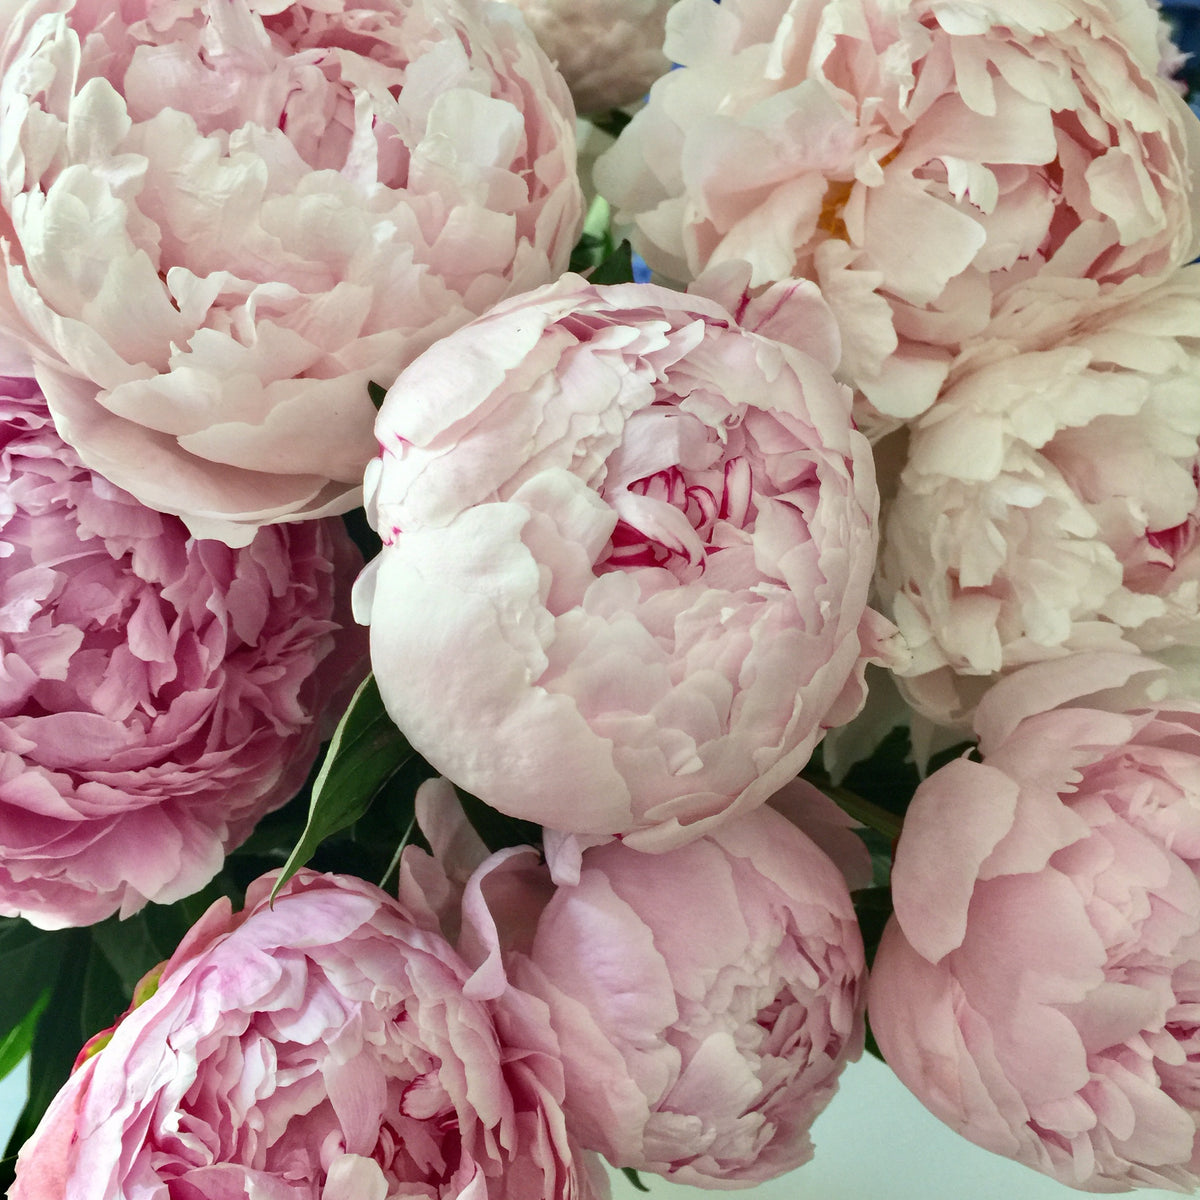 CARING FOR YOUR PEONIES